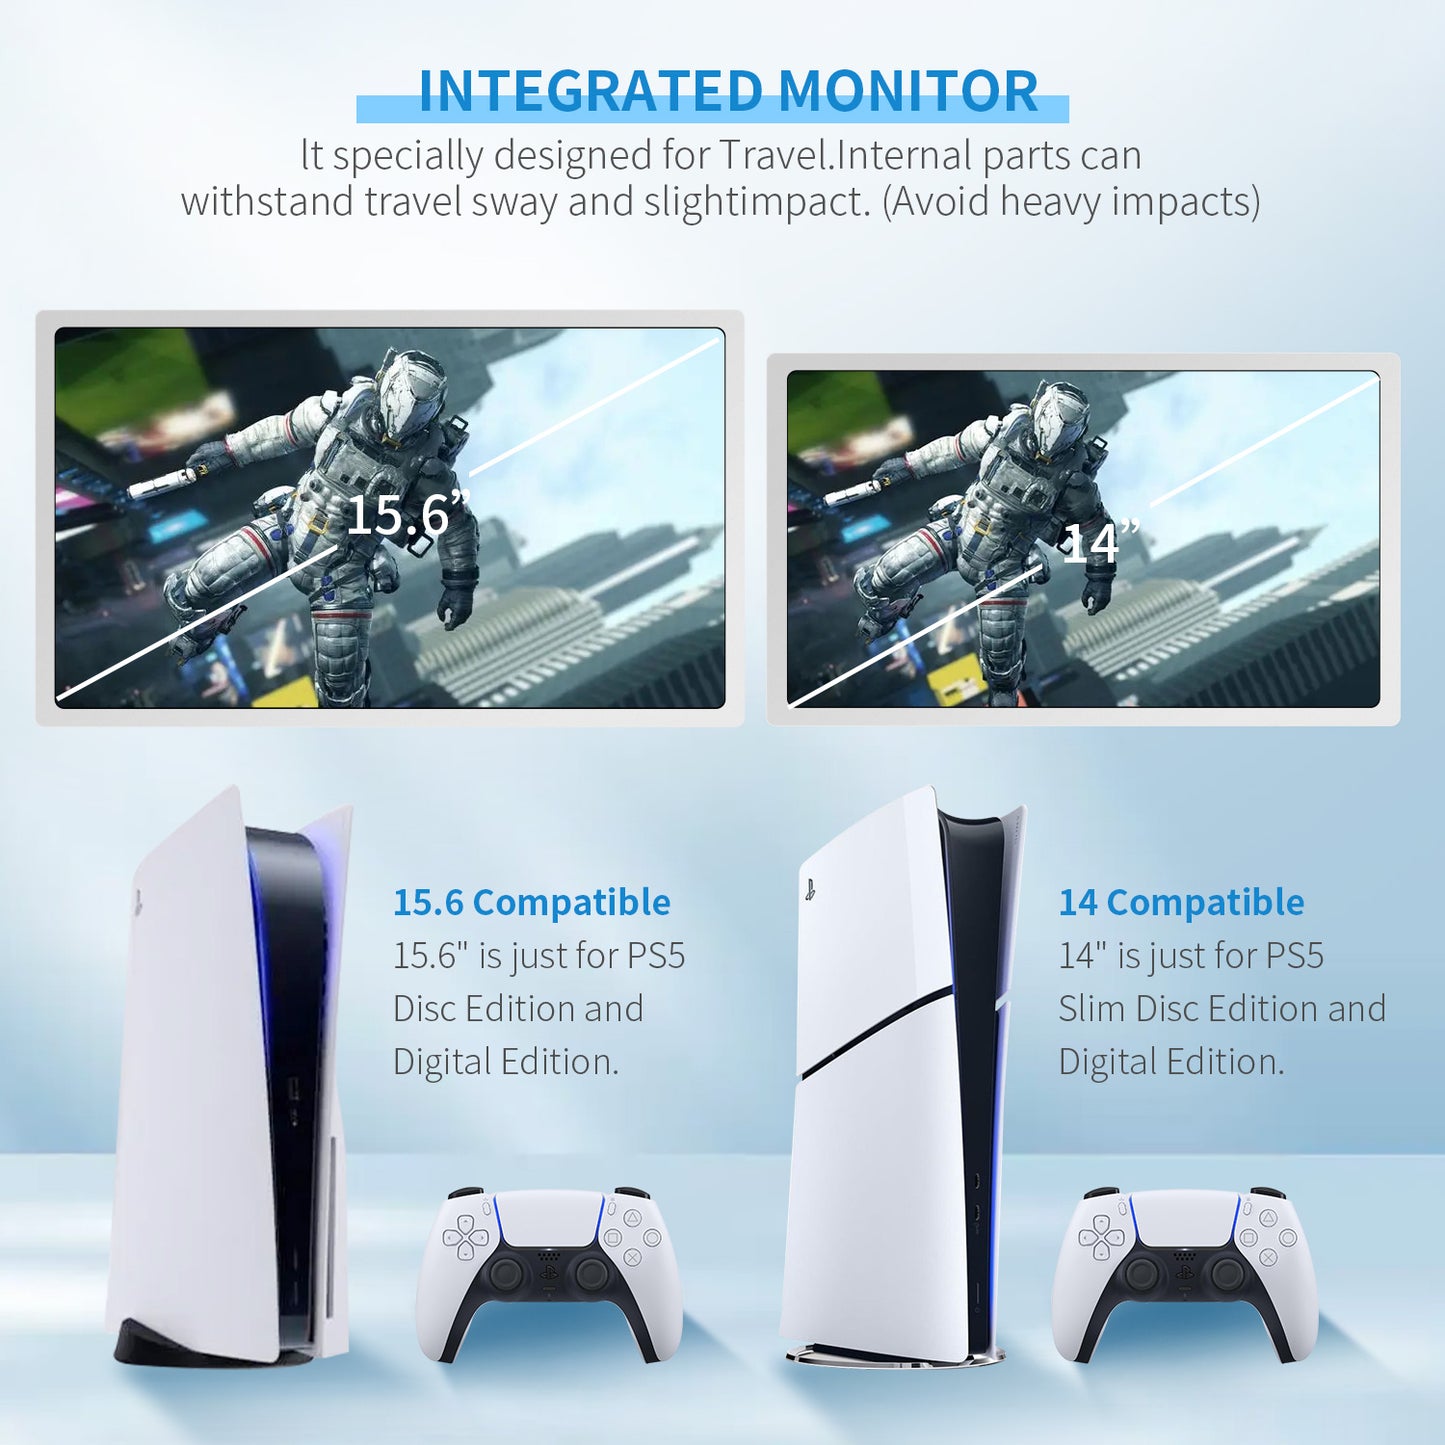 G-STORY 14" Inch IPS 4k 60Hz Portable Monitor Gaming Display Integrated with PS5 Slim(not Included)